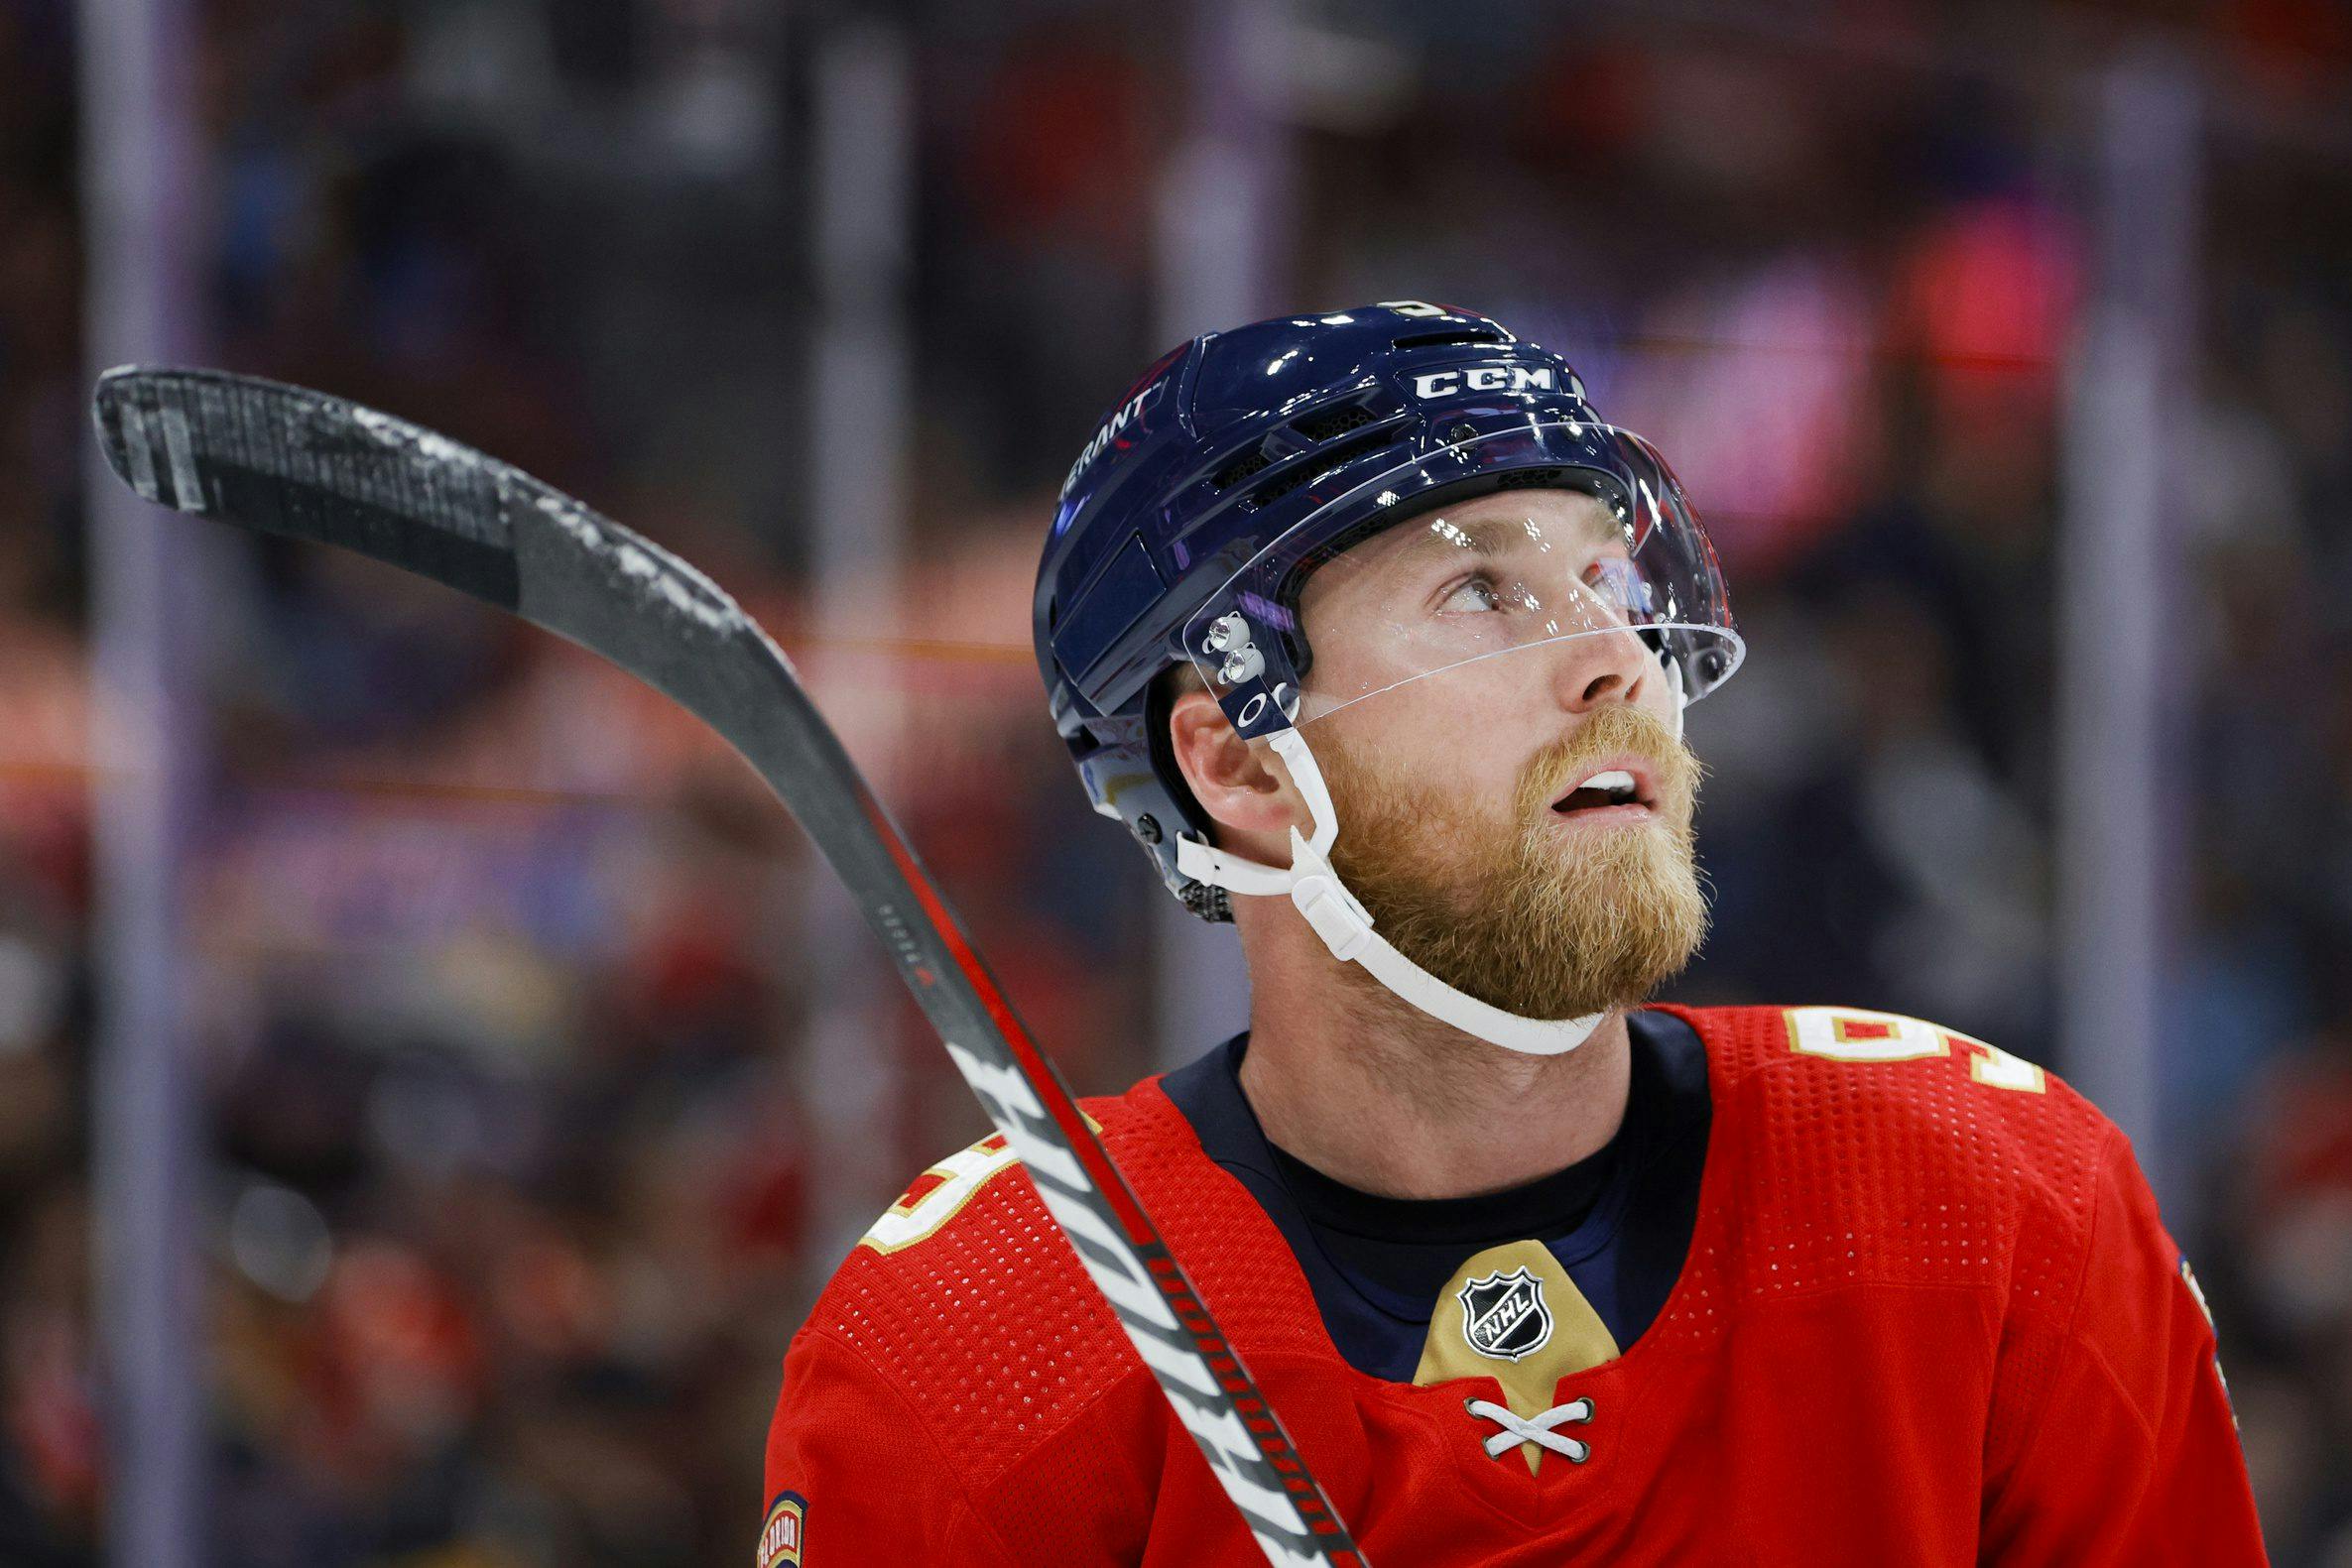 Florida Panthers’ Sam Bennett to be out “longer than day-to-day” with lower-body injury